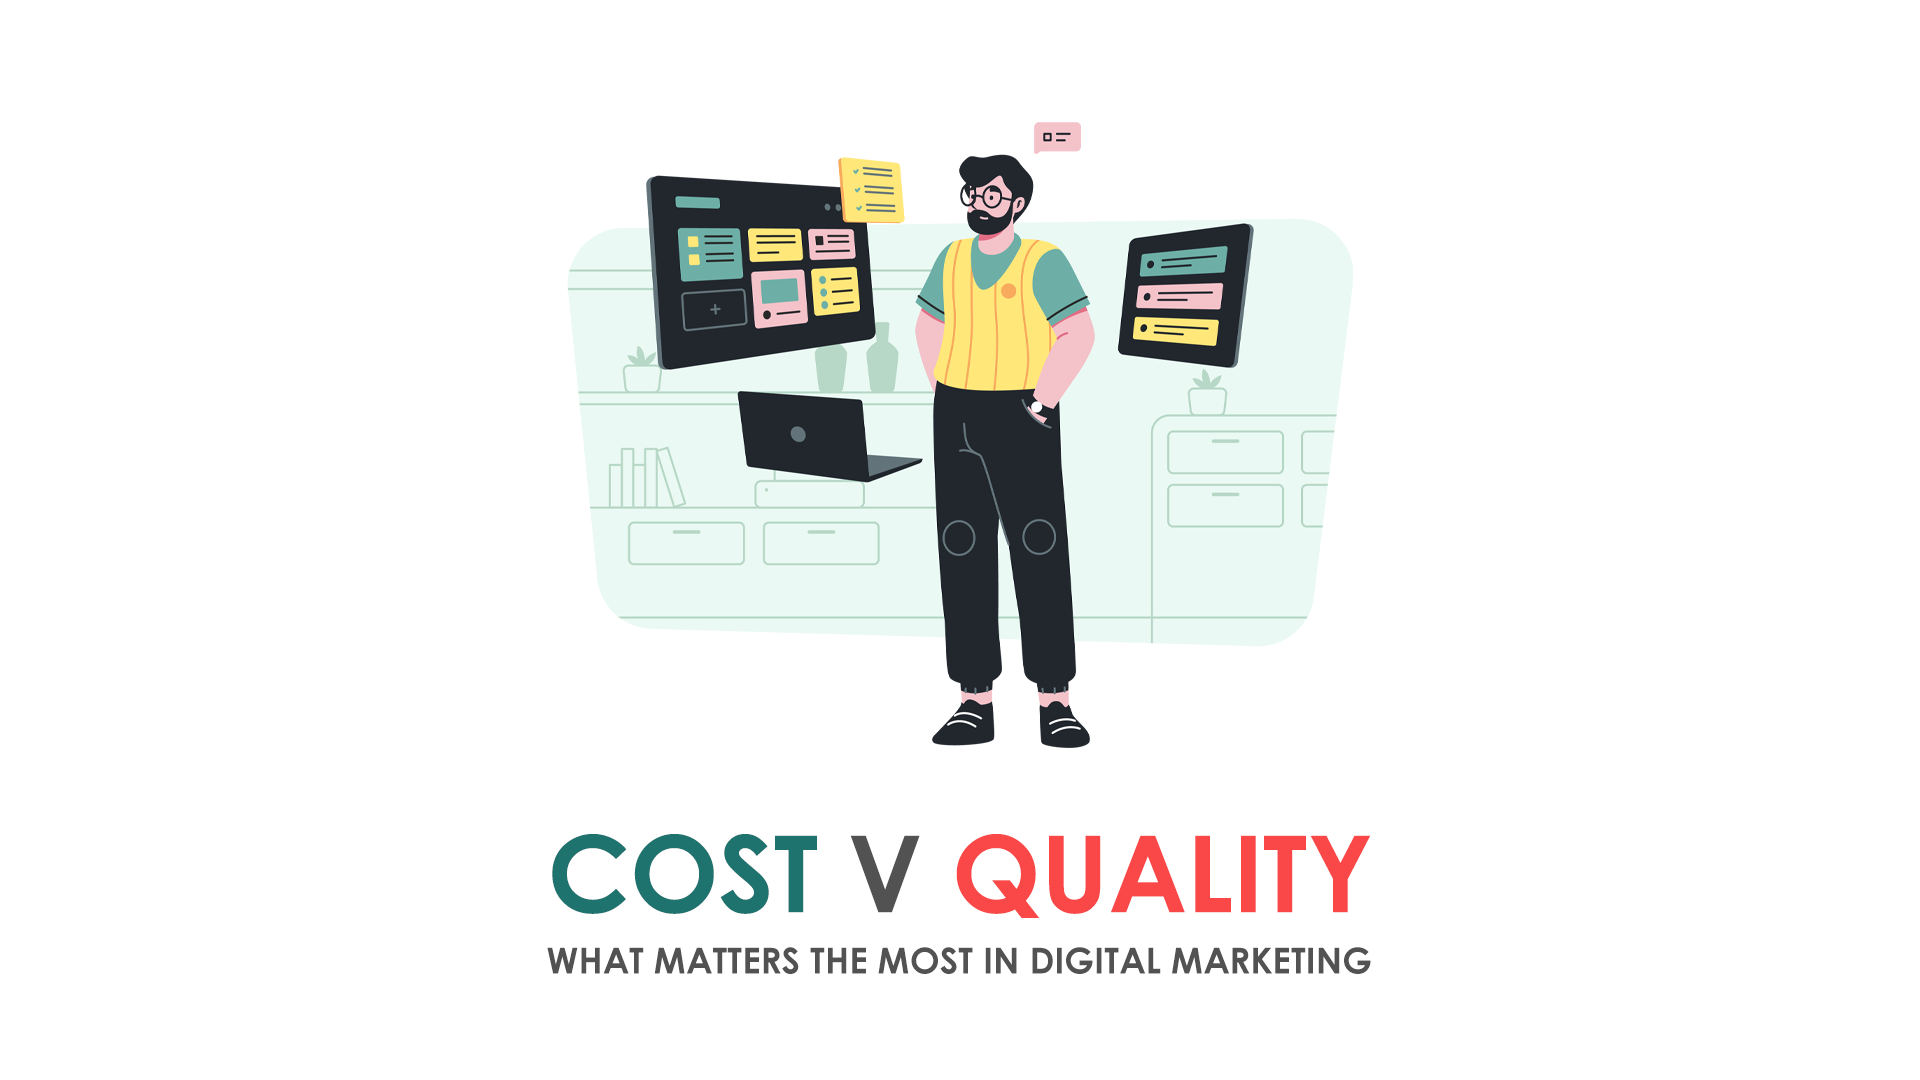 Cost or Quality? Which is the most relevant in Digital Marketing